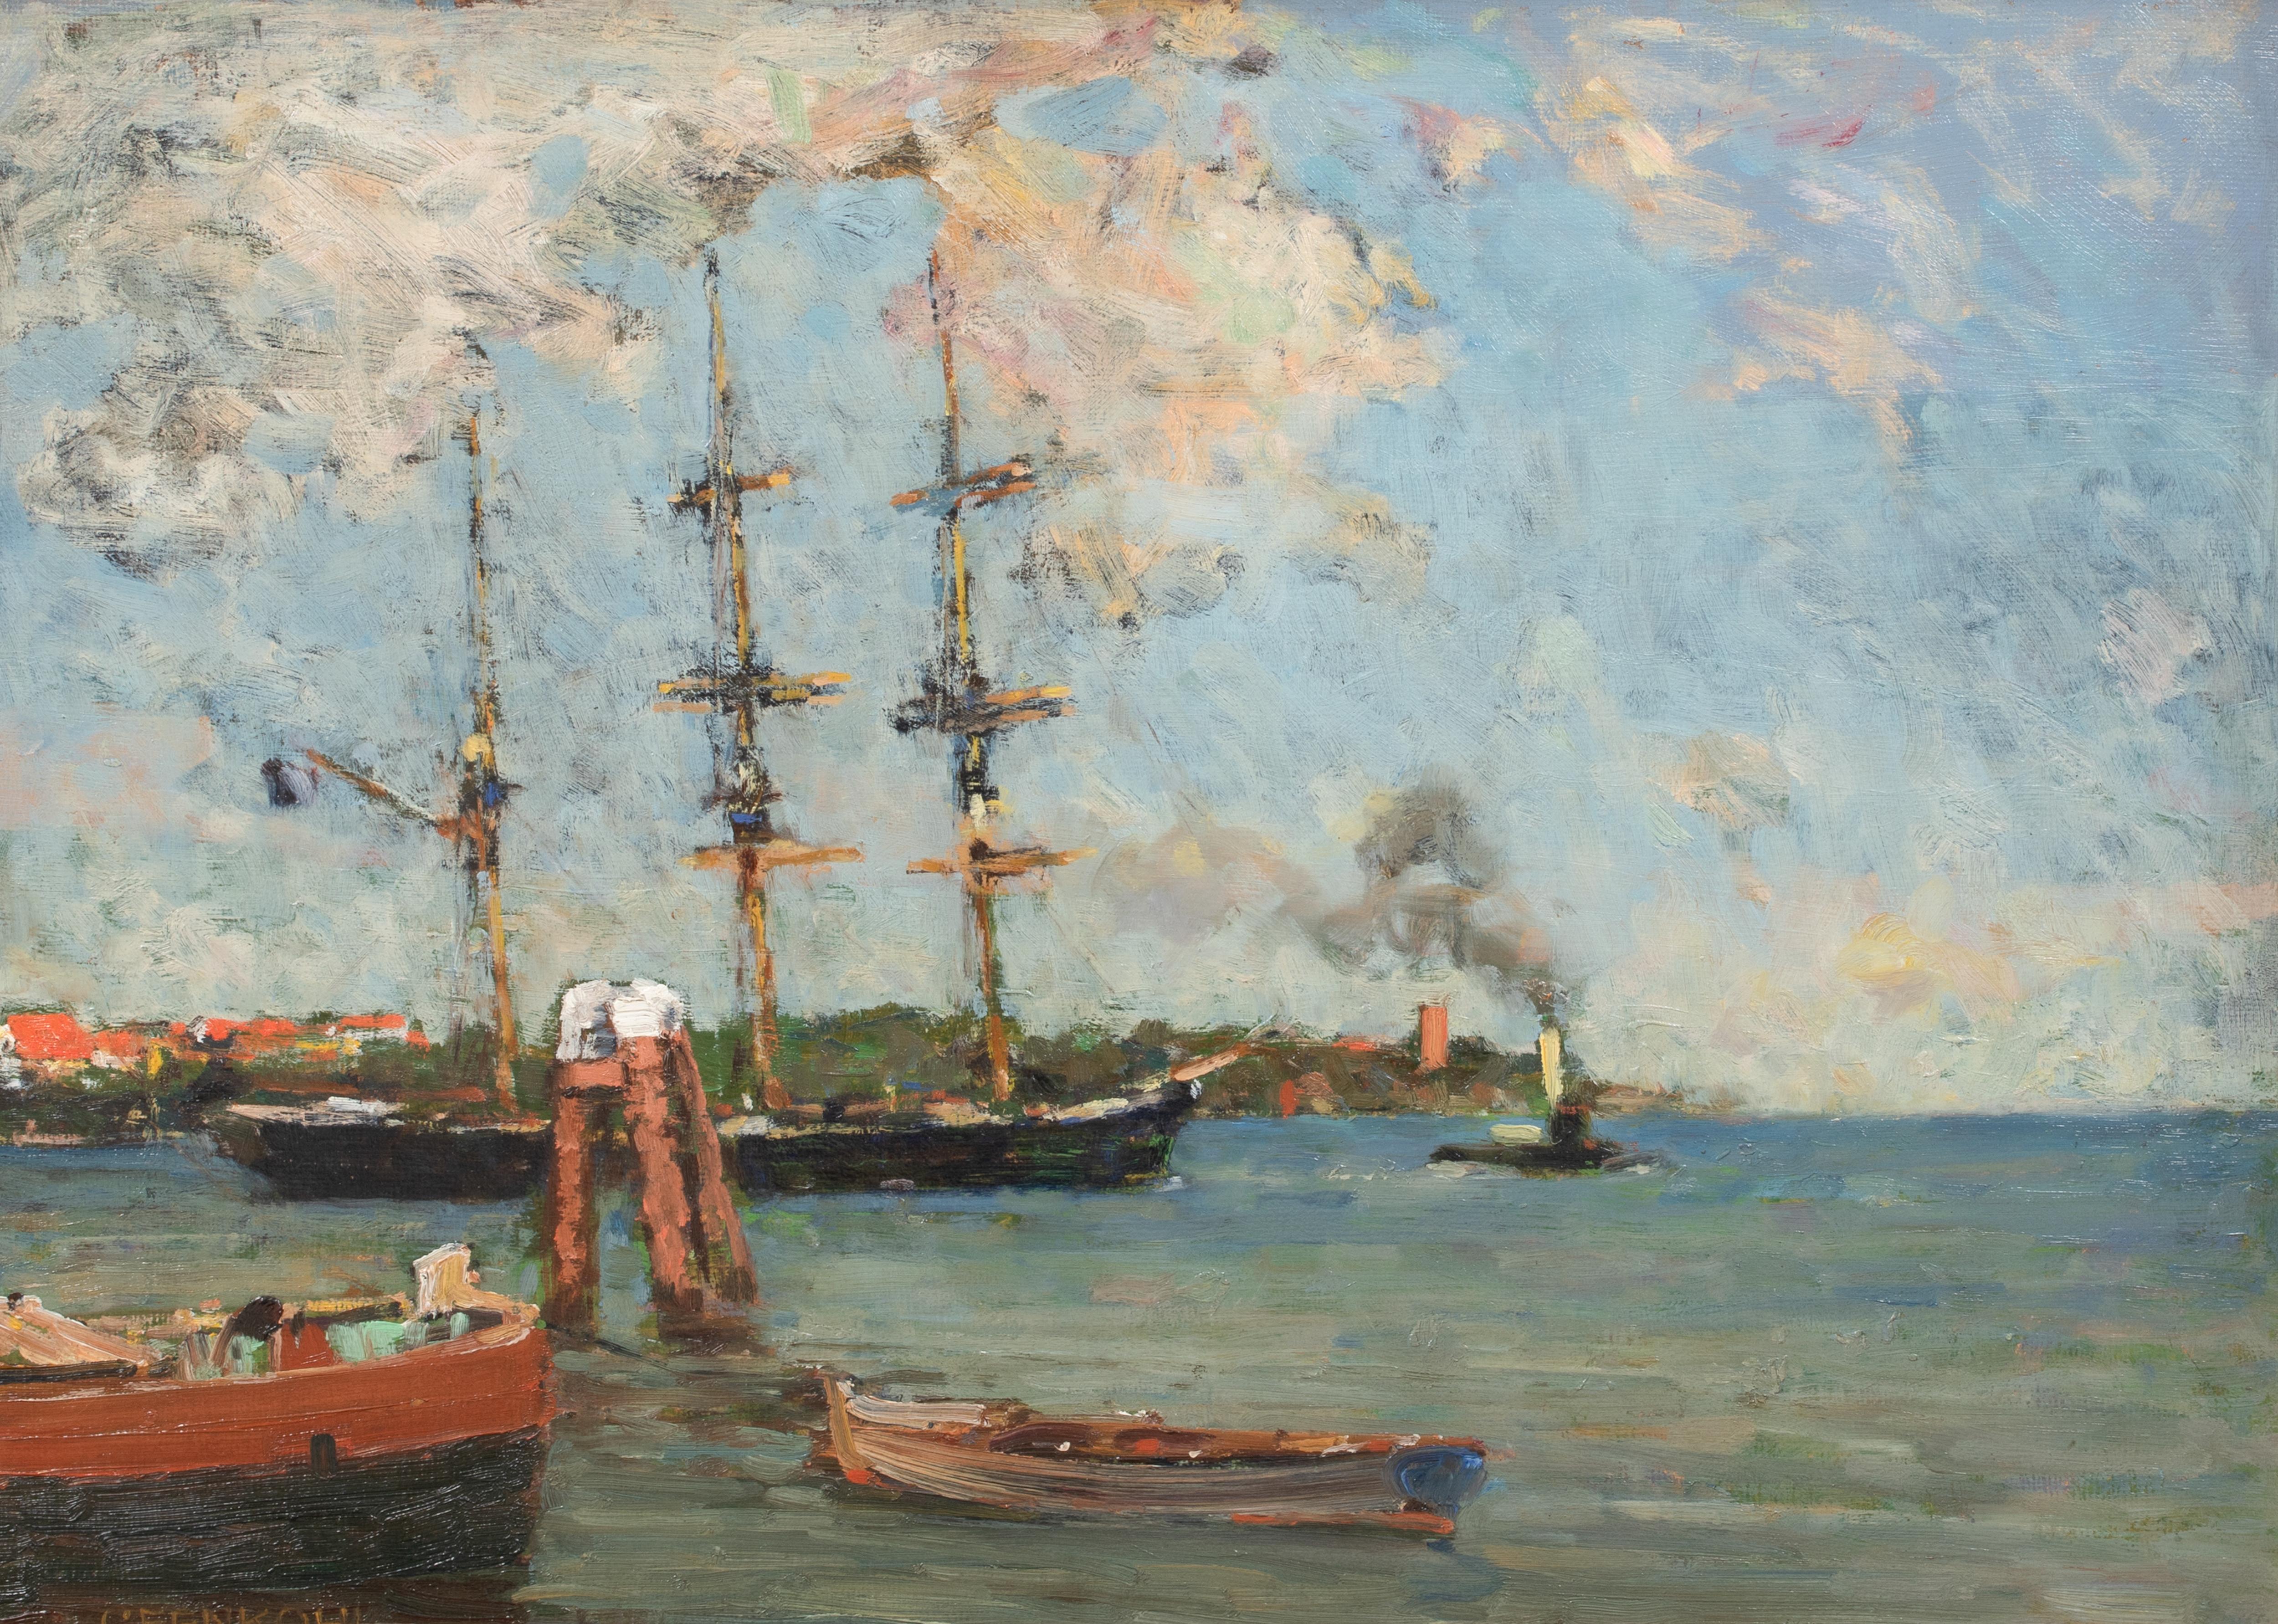 Memel Harbour, circa 1900 

Gustav Fenkohl (German, 1872-1950)

Large circa 1900 view of Memel Harbour, Lithuania, oil on canvas by Gustav Fenkohl. Excellent quality and condition impressionist study of the busy port and an early account of the